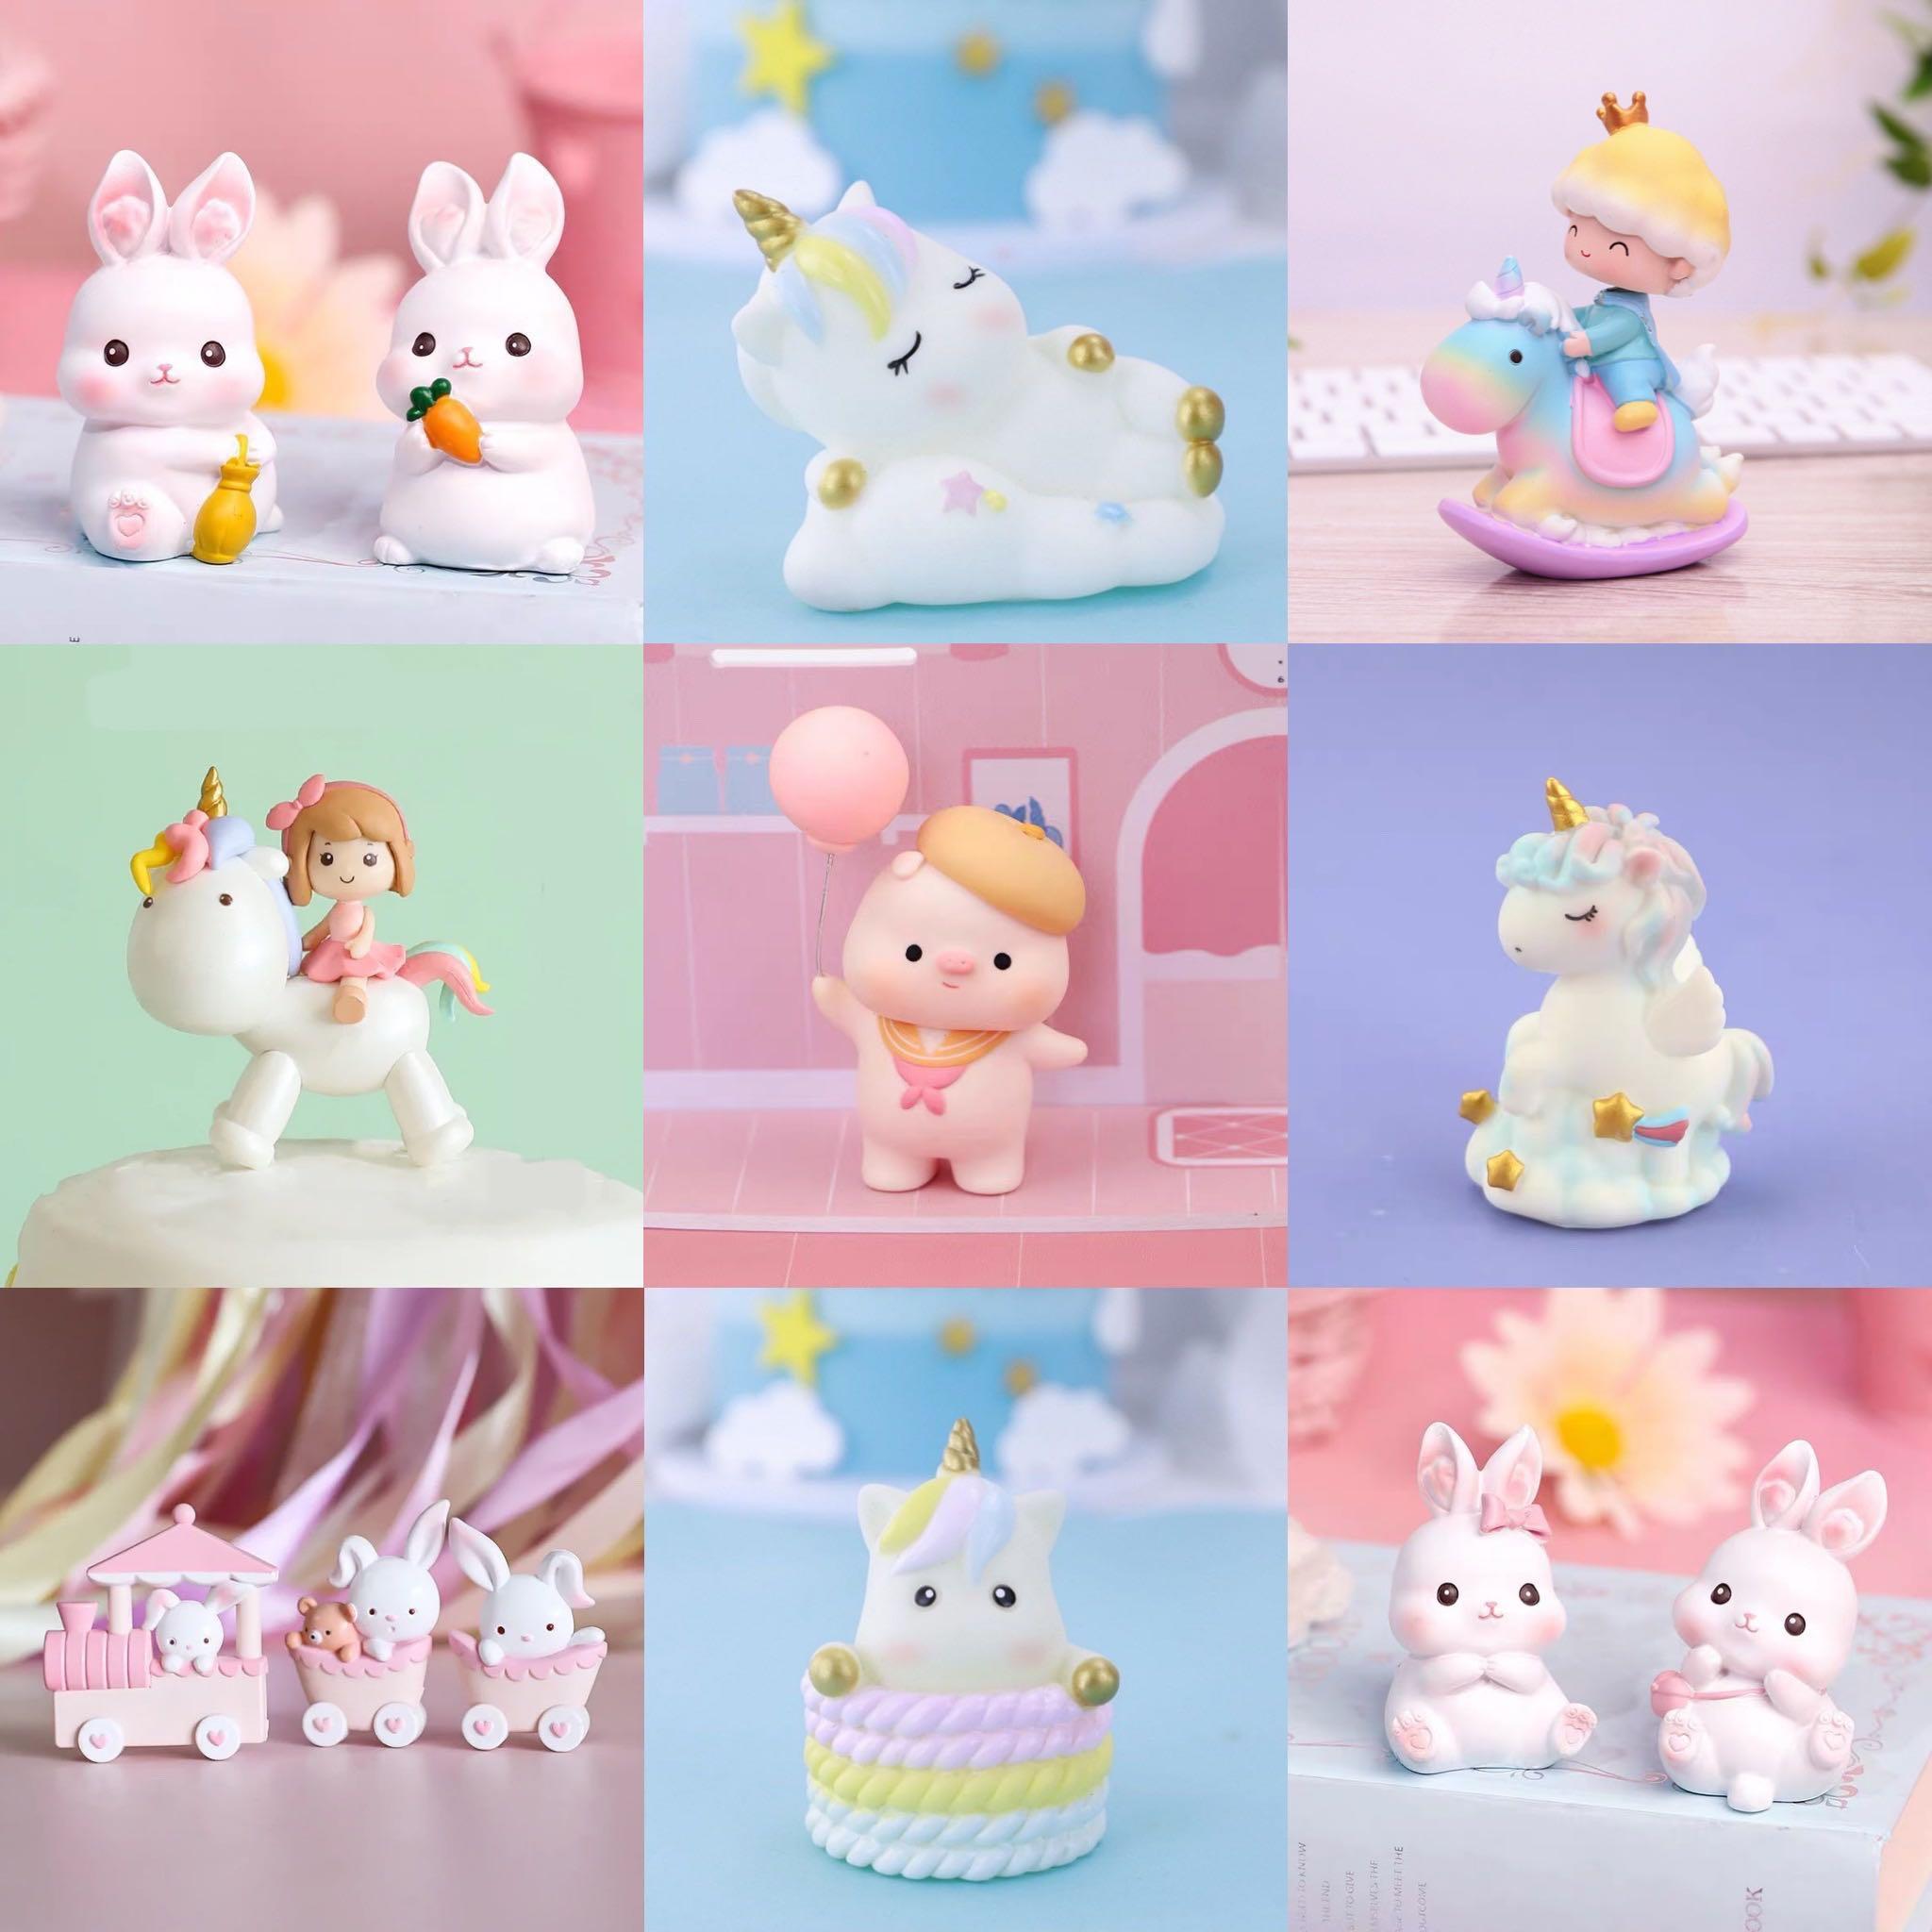 Rabbit theme party decoration 8 pcs Easter Mini Bunny Figurines Easter Cake Topper,Easter Ornaments 